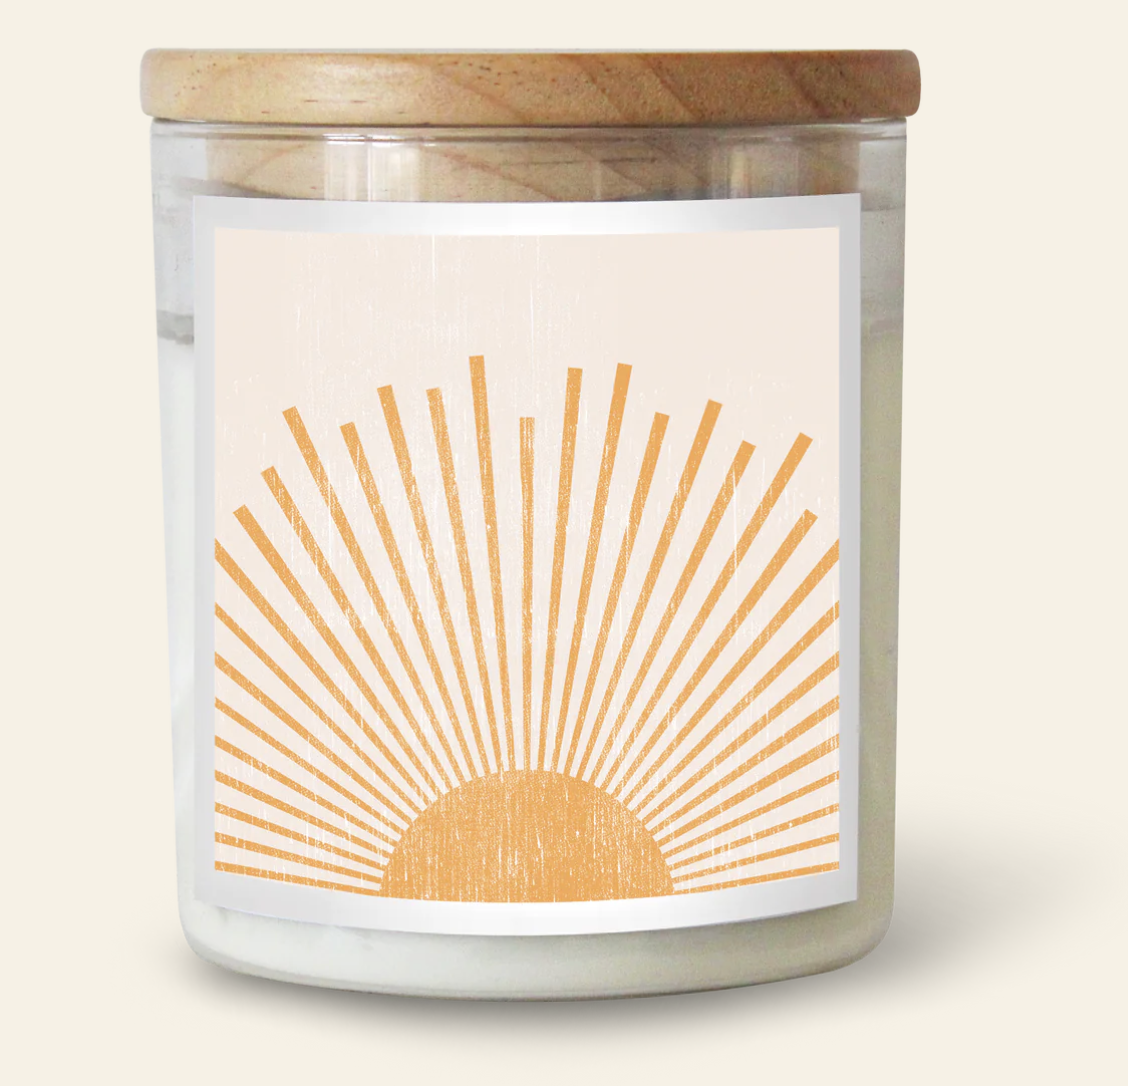 The Commonfolk Sun Dial Candle